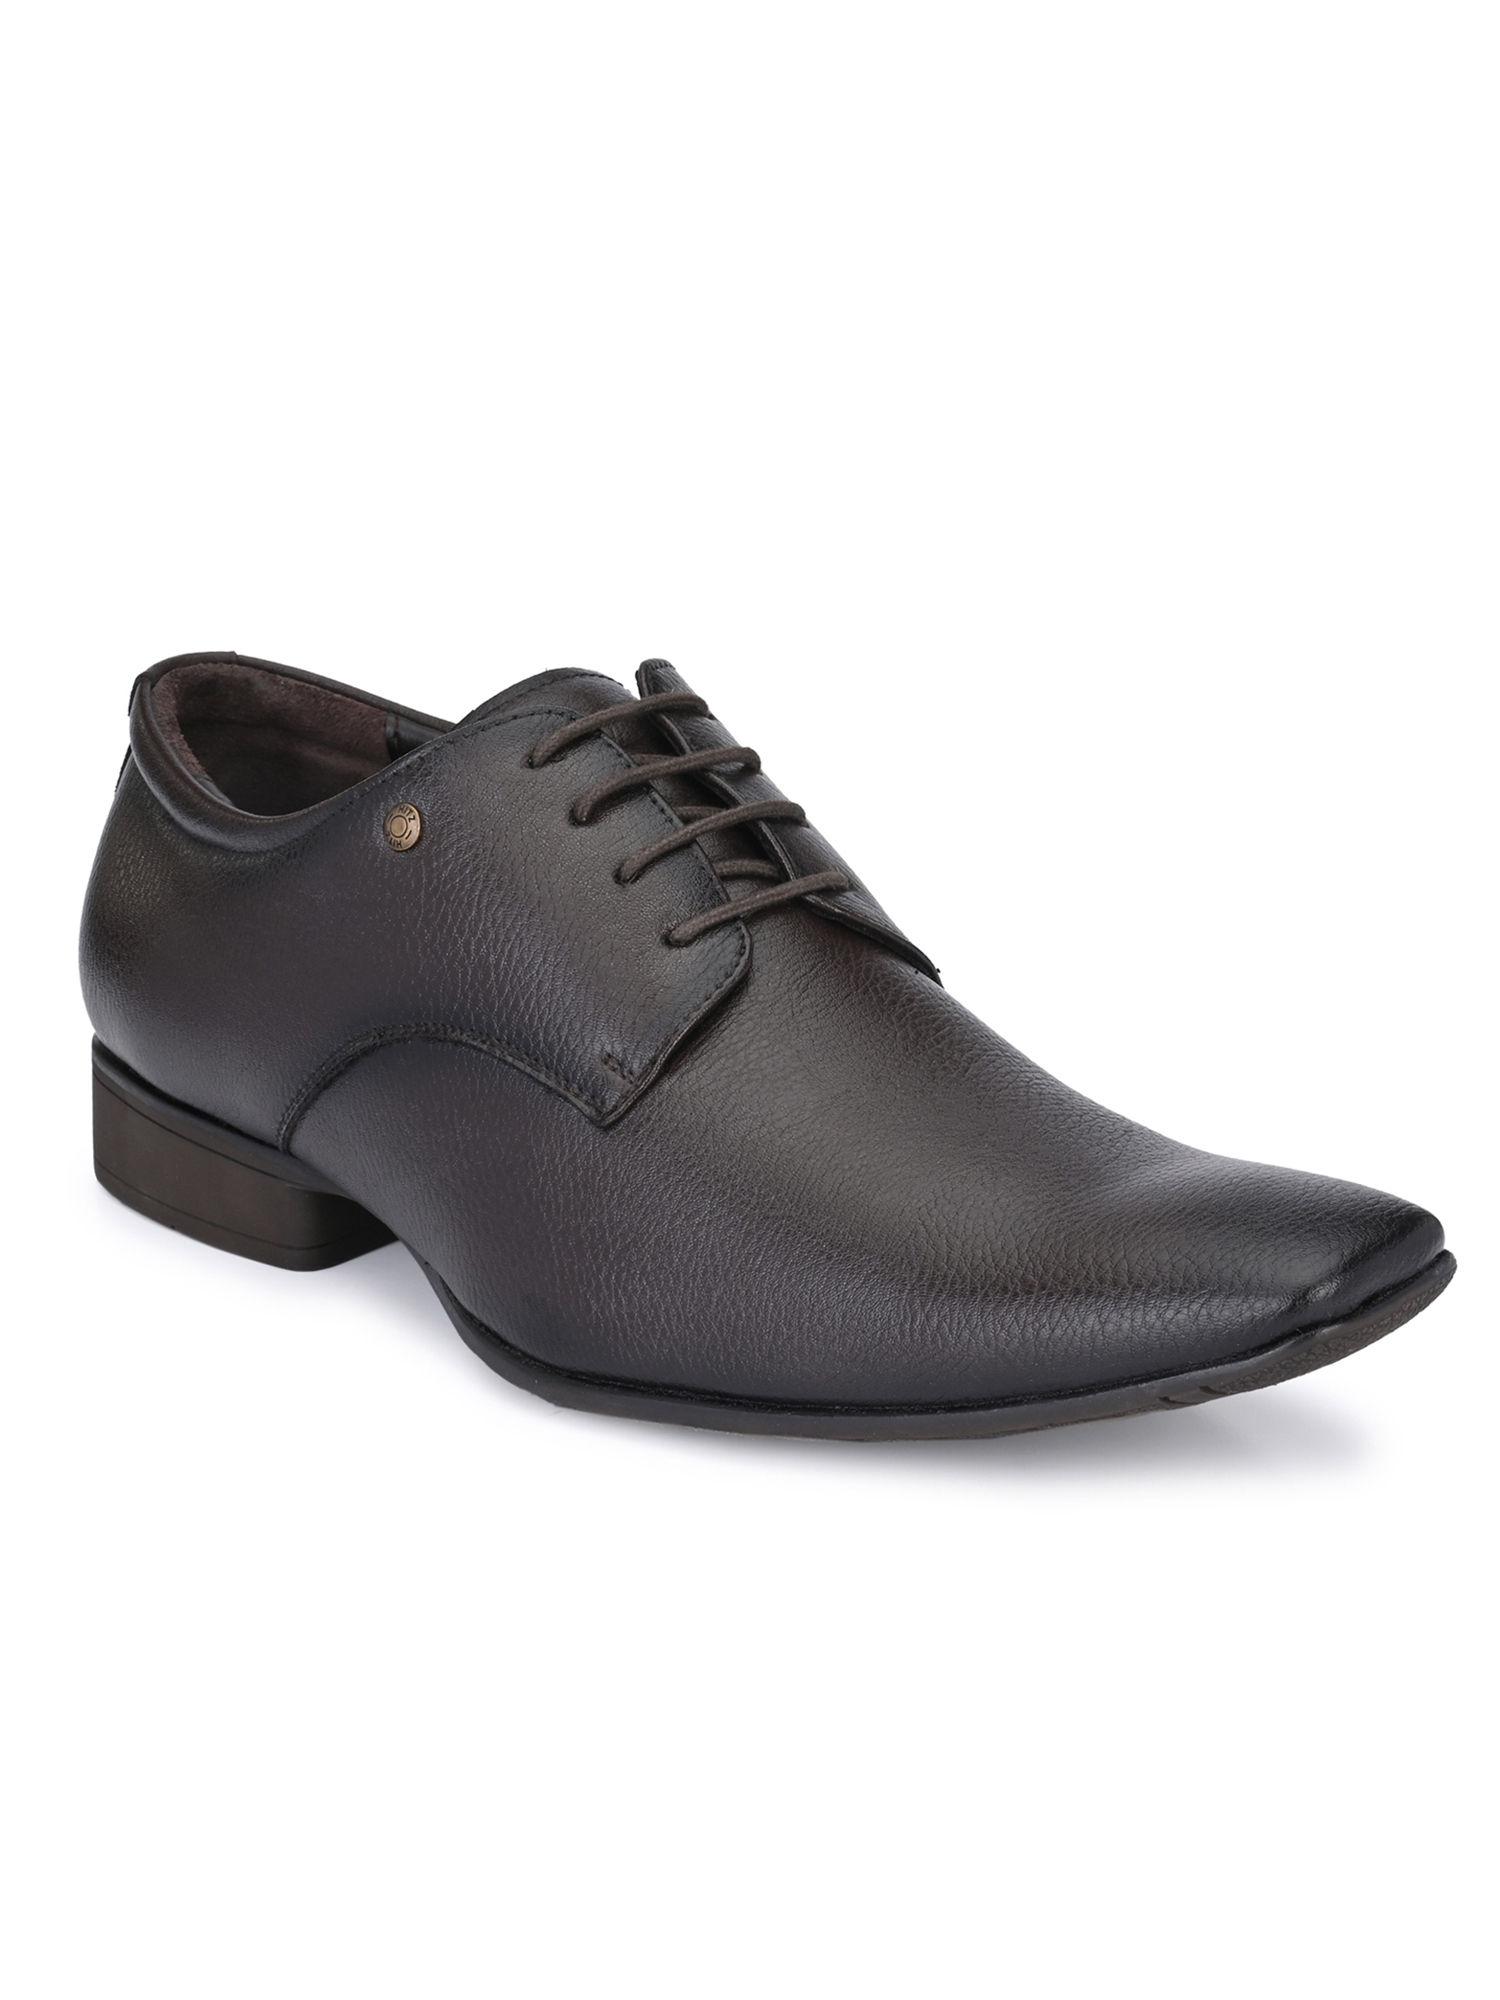 men's brown synthetic lace-up formal shoes